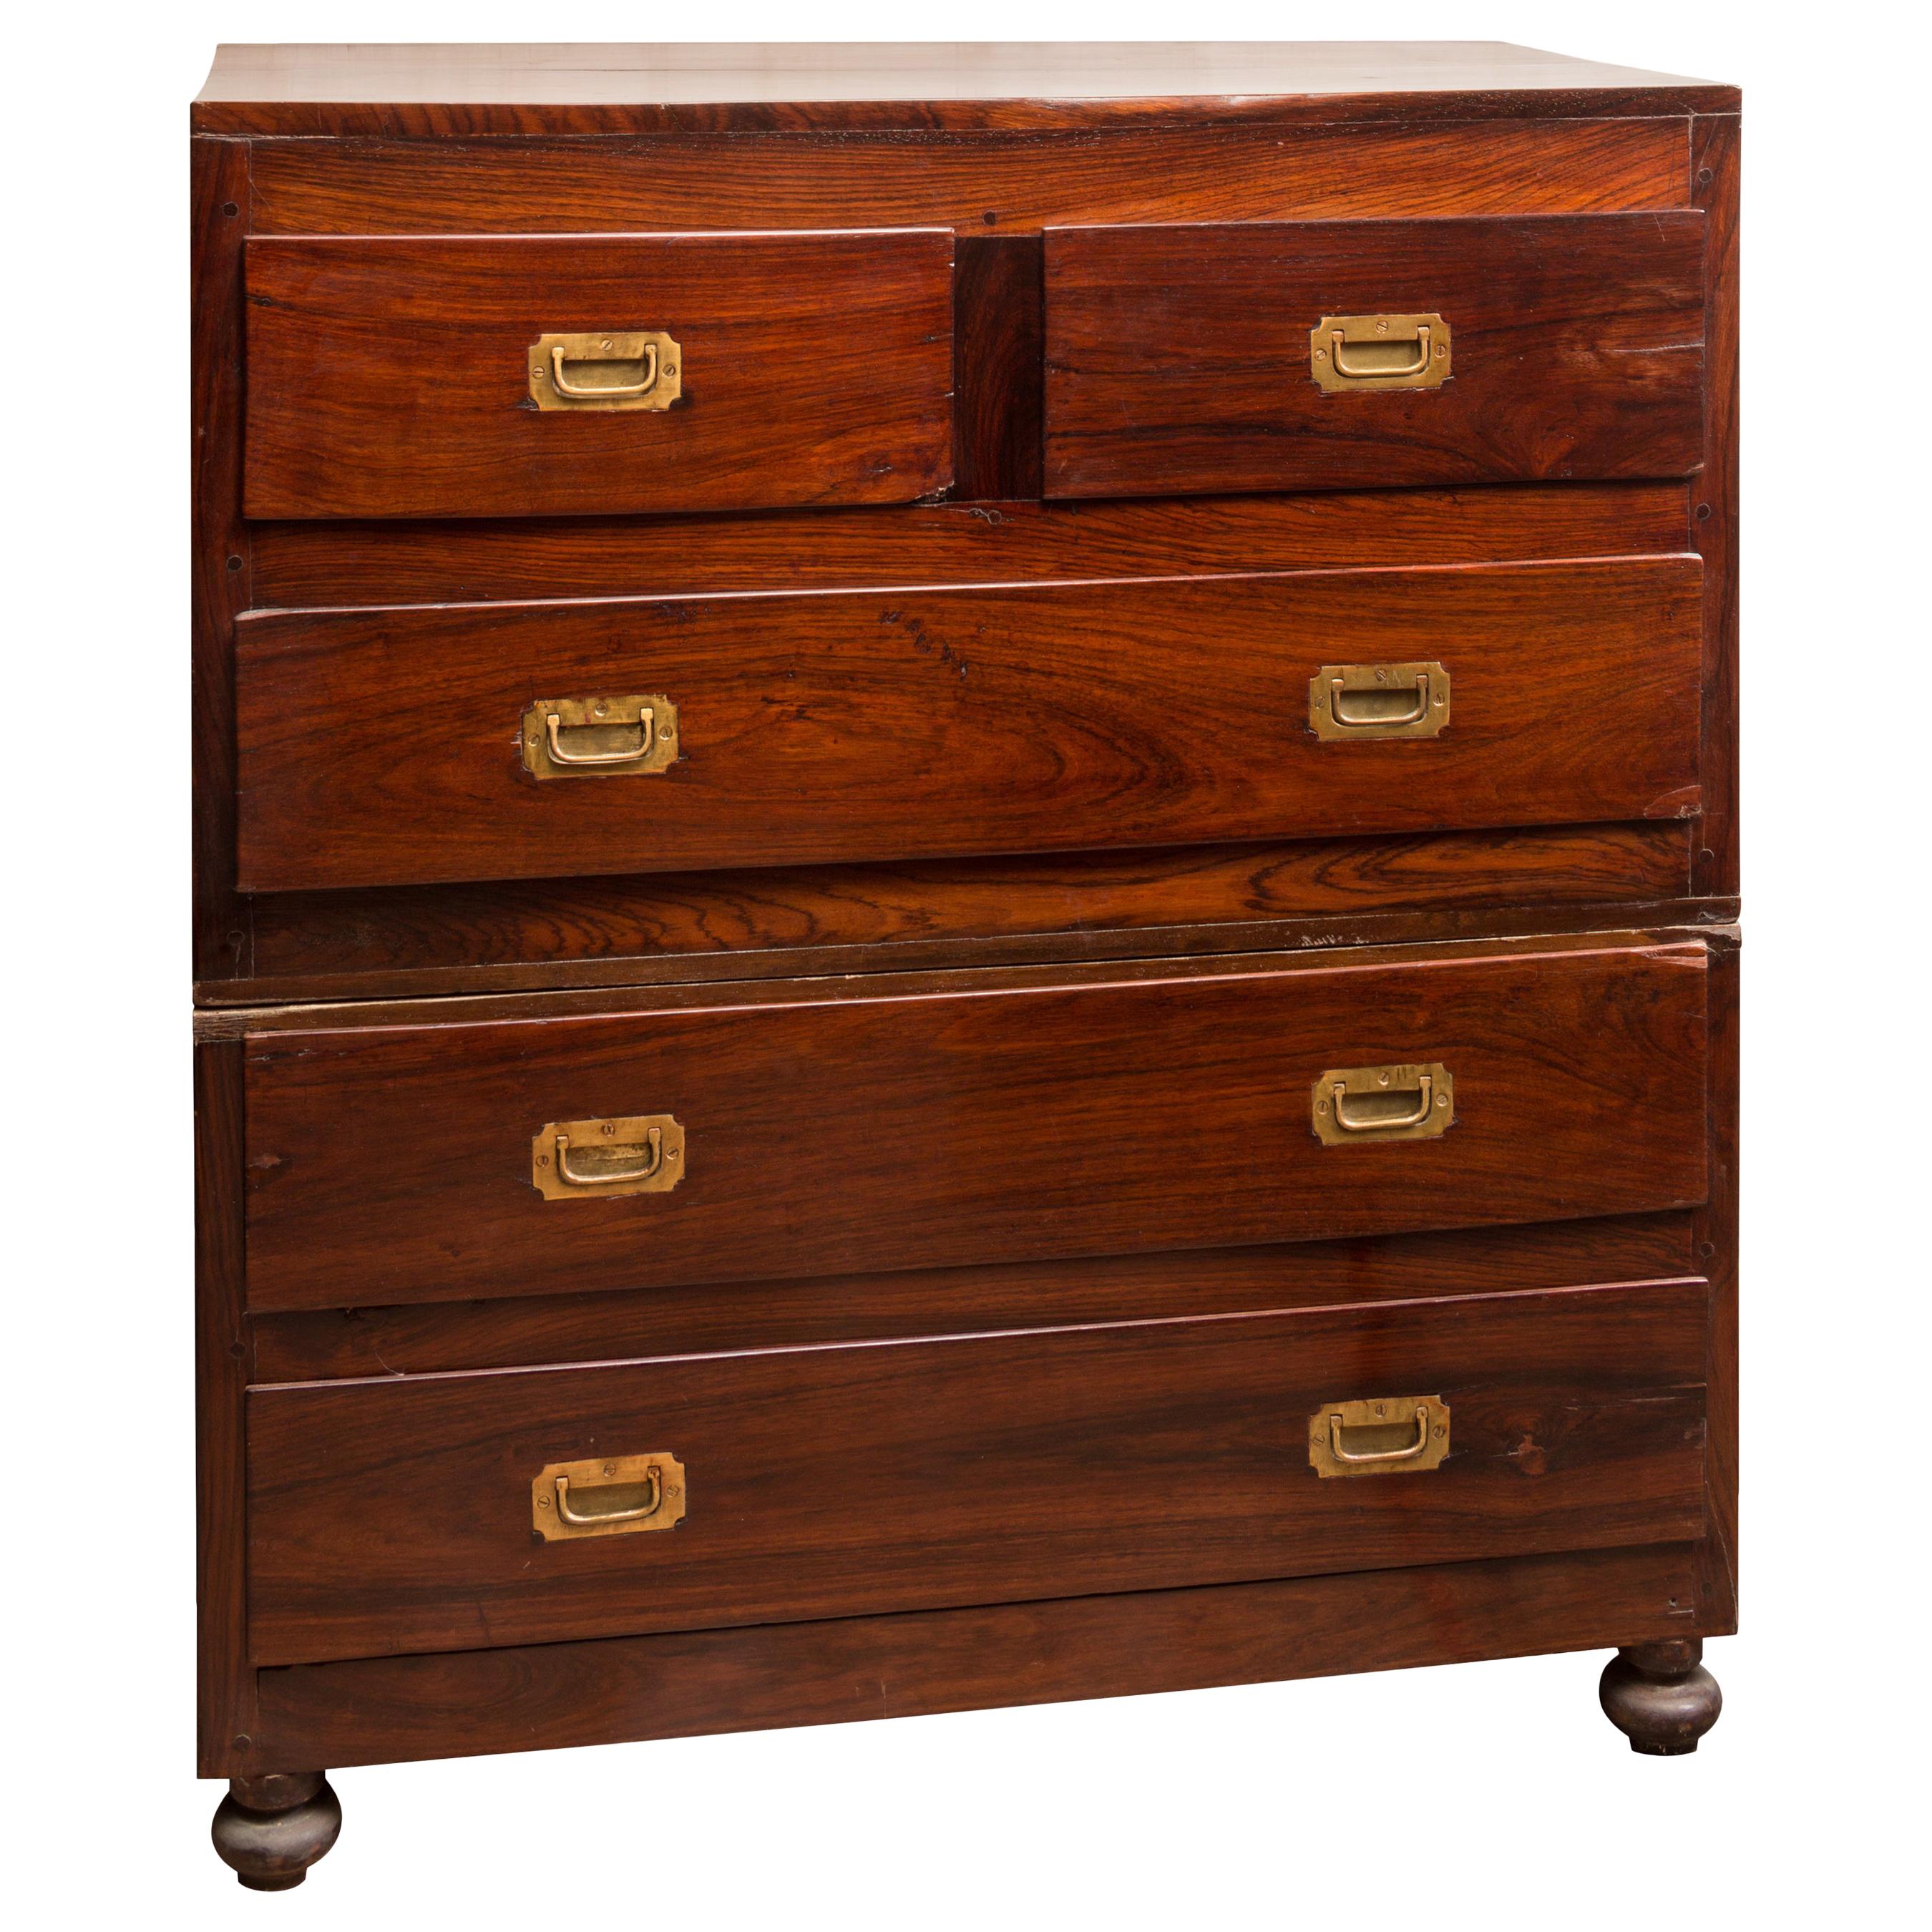 Two-piece 19th Century British Campaign Chest of Drawers with Brass Hardware